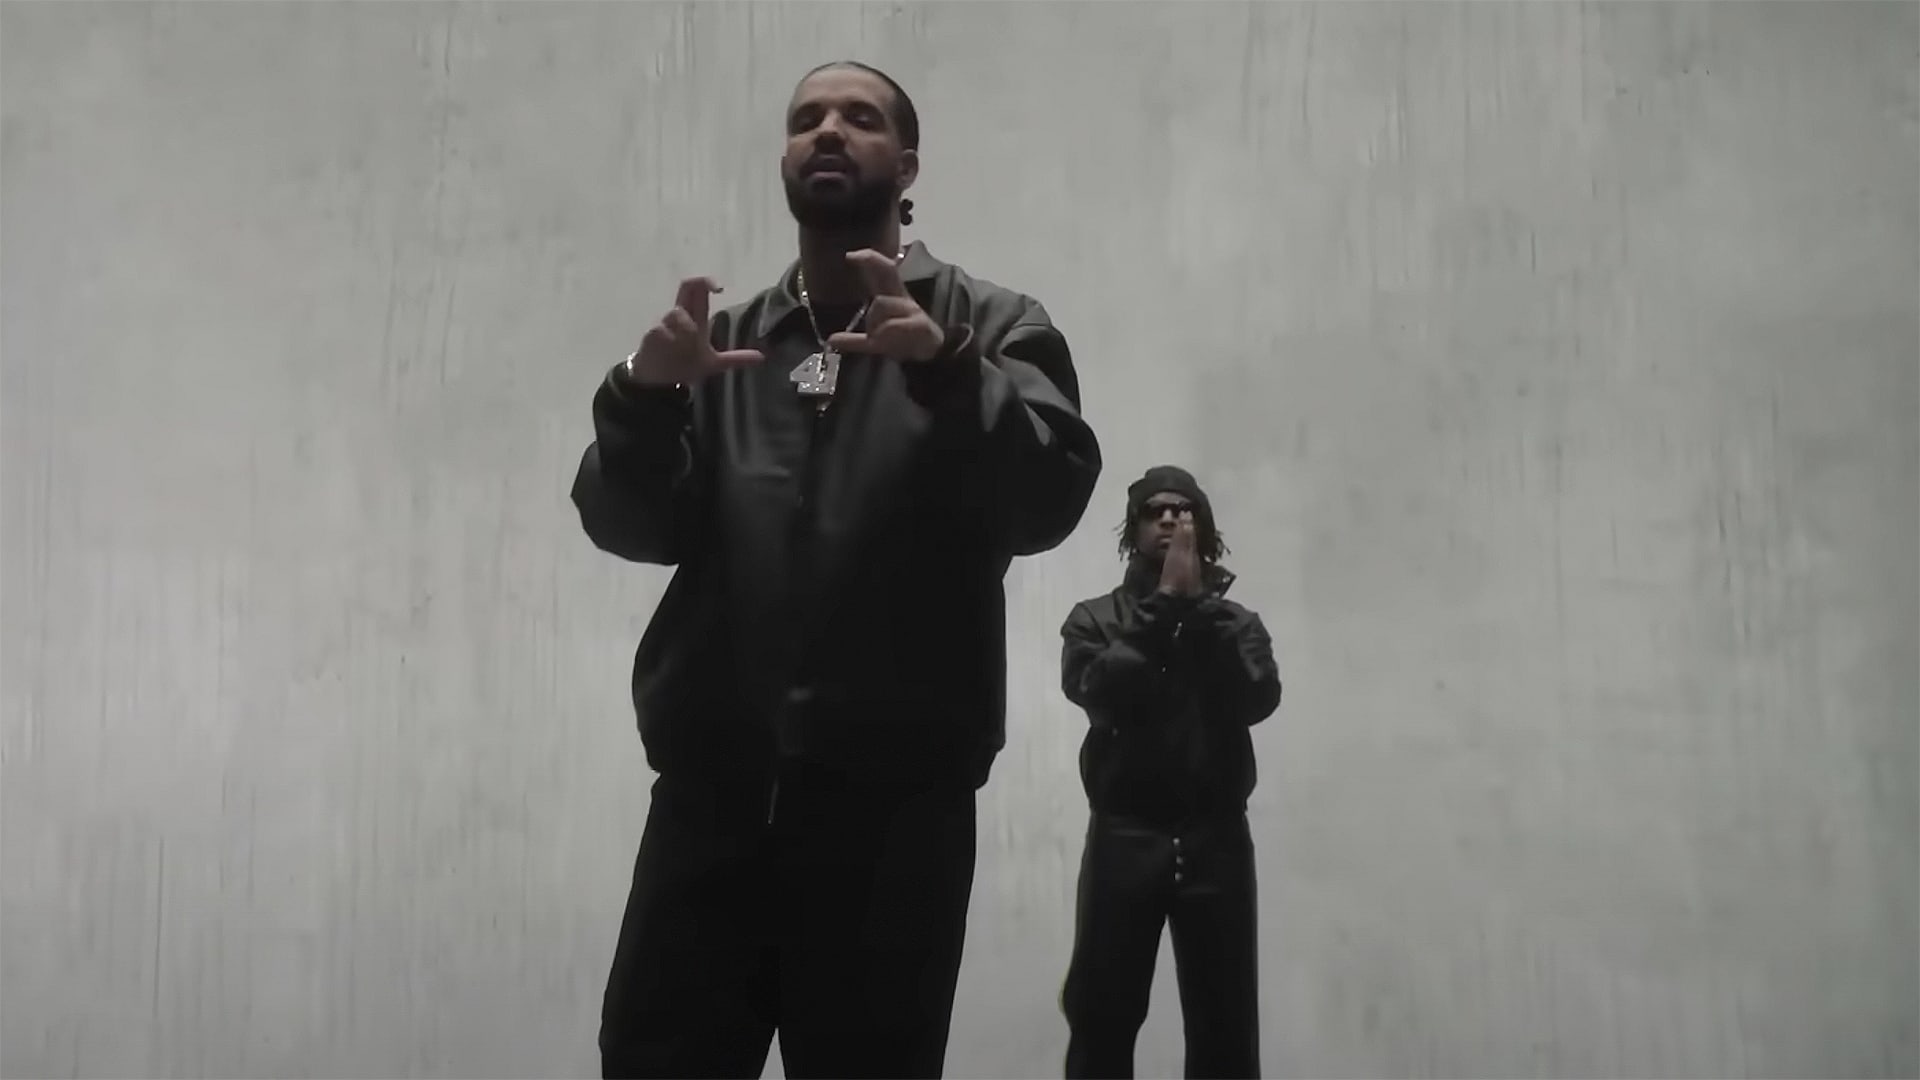 Drake And 21 Savage Announce Joint Album, 'Her Loss' –